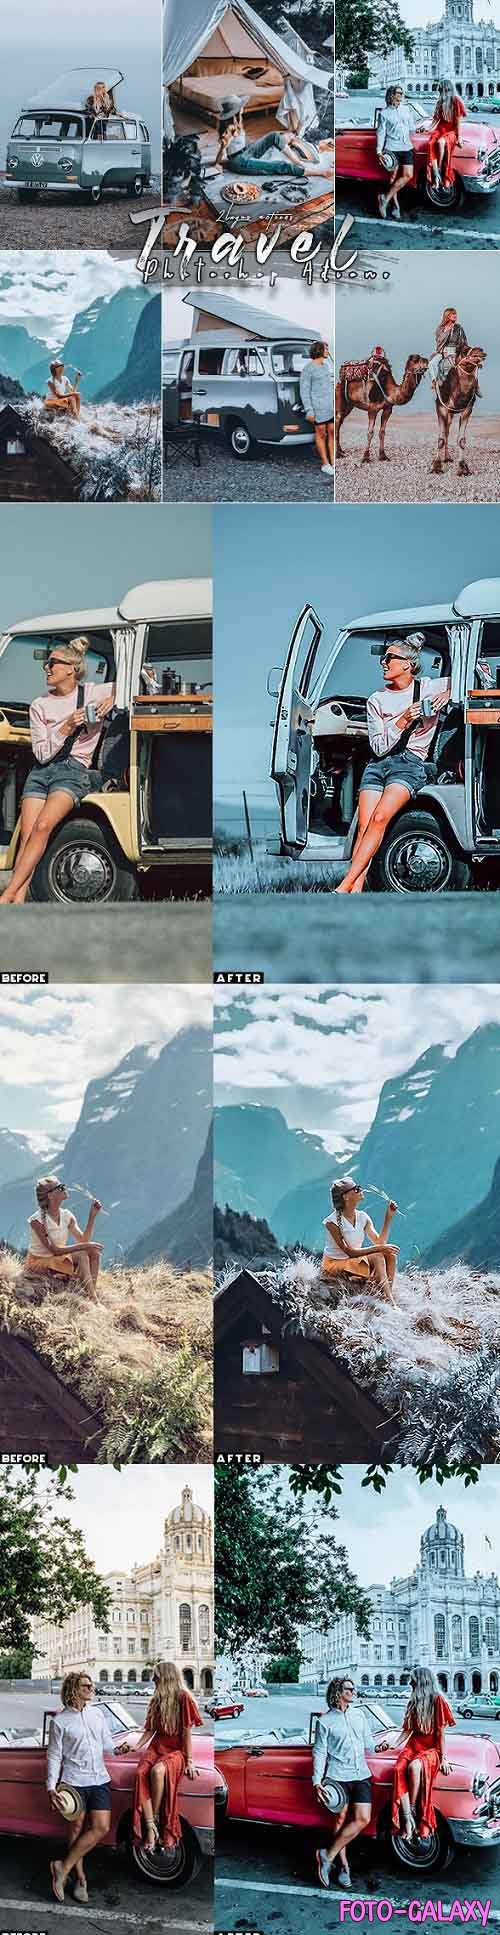 Moody Travel Photoshop Actions - 29917474